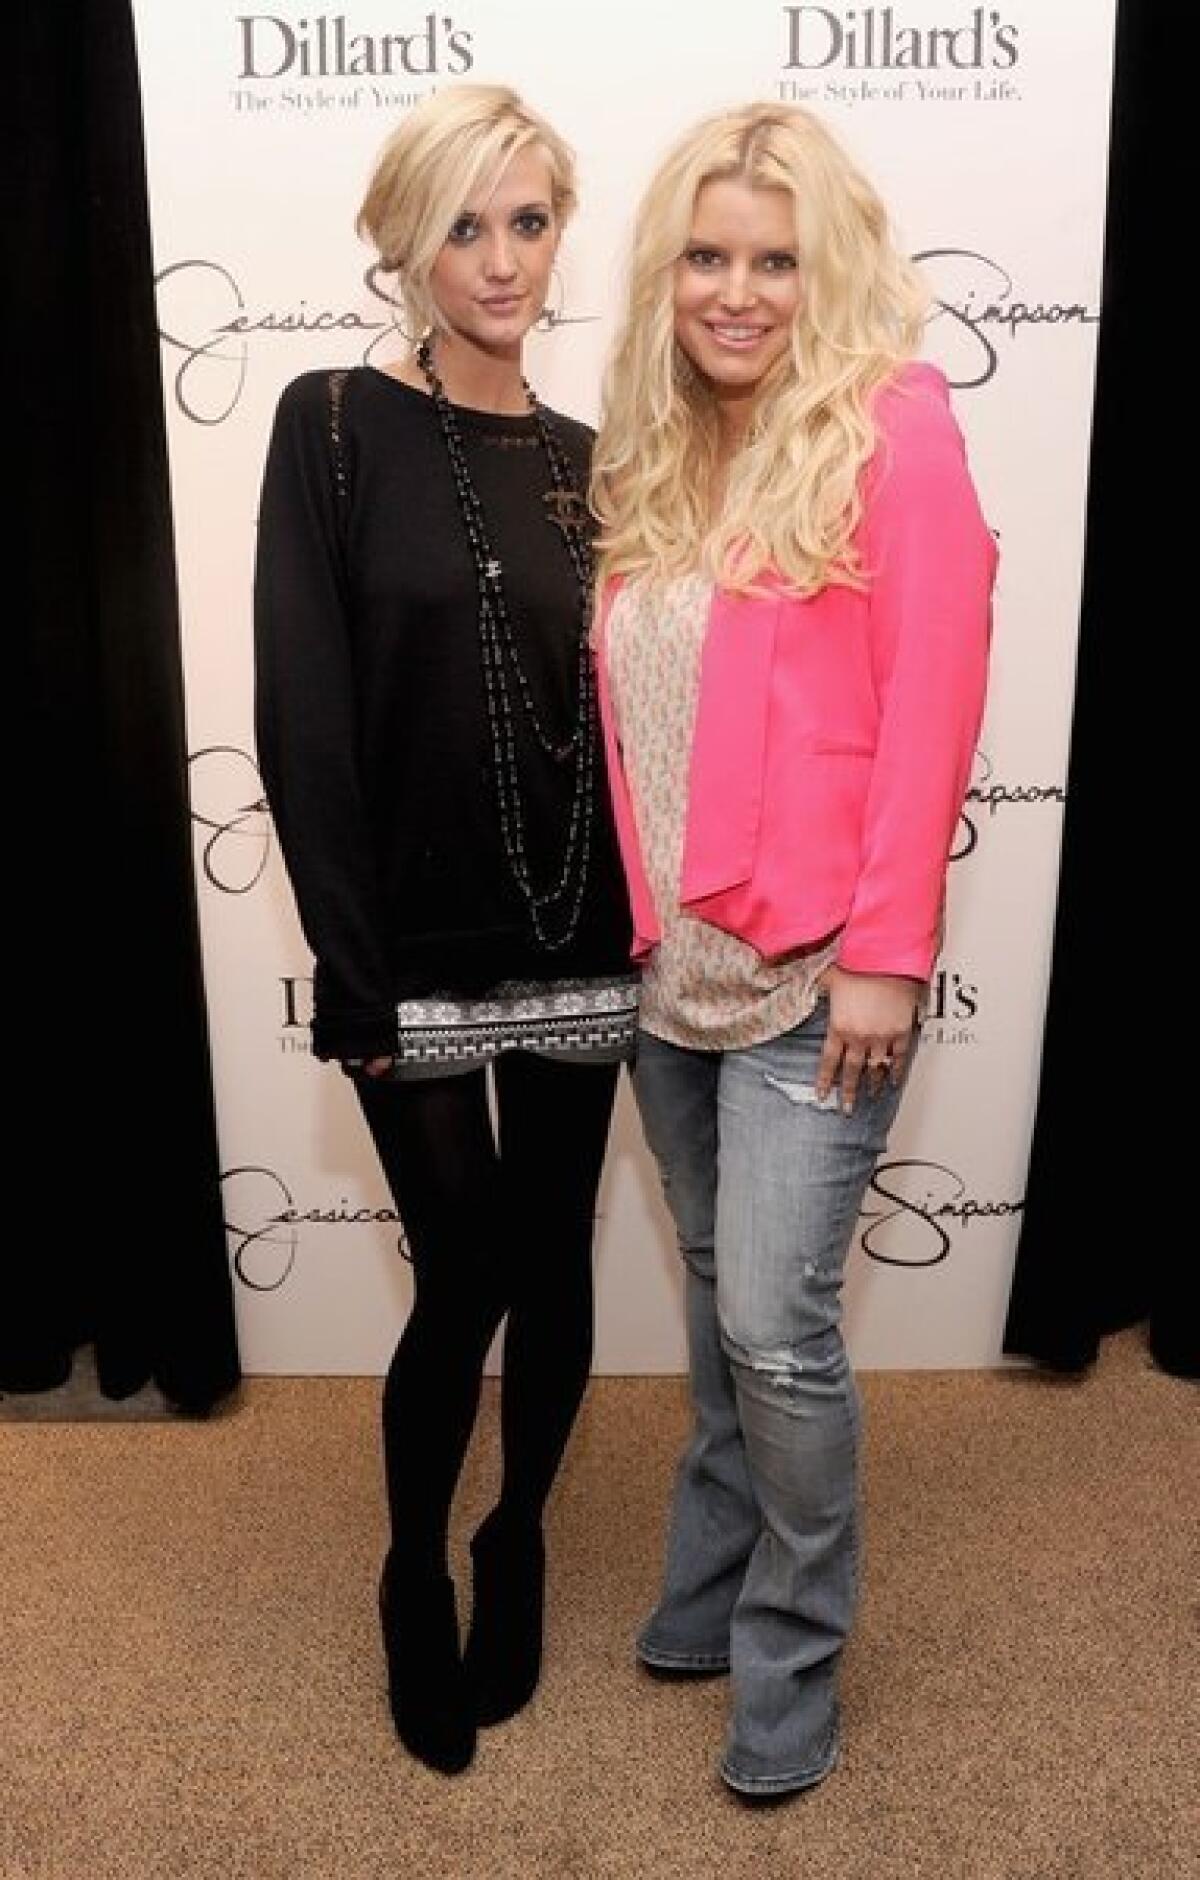 Jessica Simpson, right, with sister Ashley at Dillard's in Tampa, Fla., shows off her 60-pound weight loss.